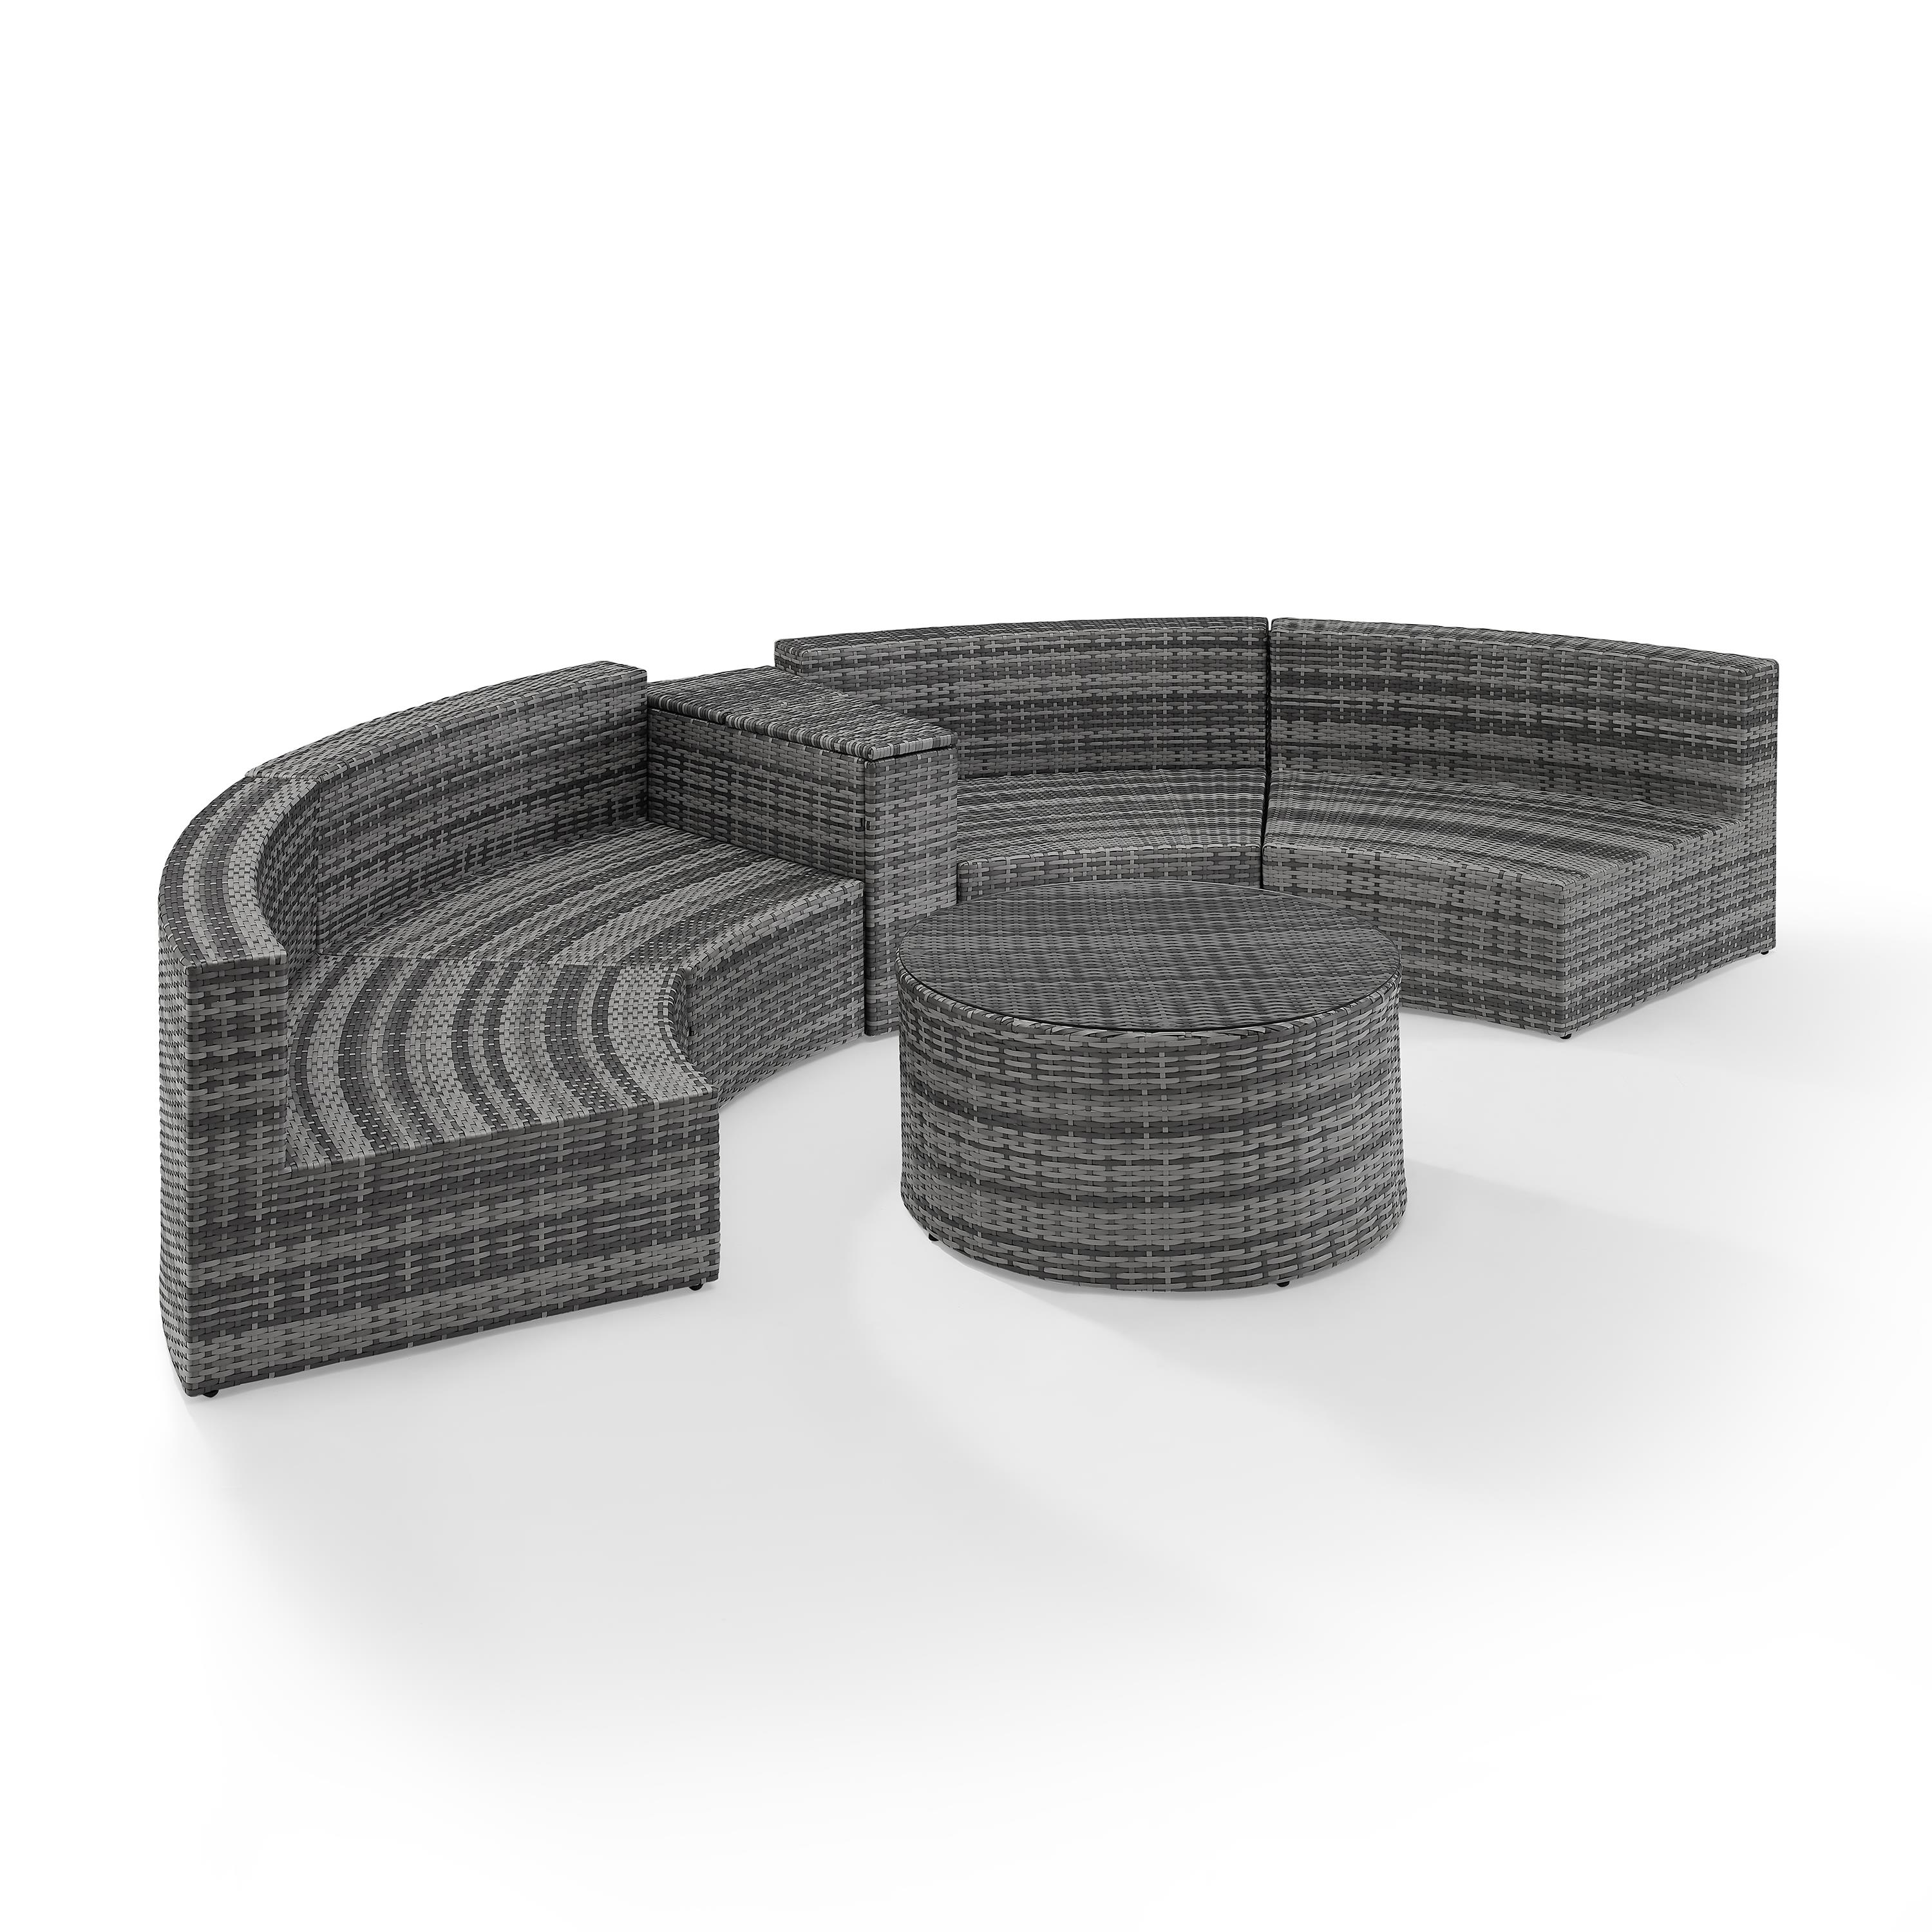 Crosley Catalina 4Pc Outdoor Wicker Sectional Set Gray/Gray - Arm Table, Round Glass Top Coffee Table, & 2 Round Sectional Sofas - image 4 of 9